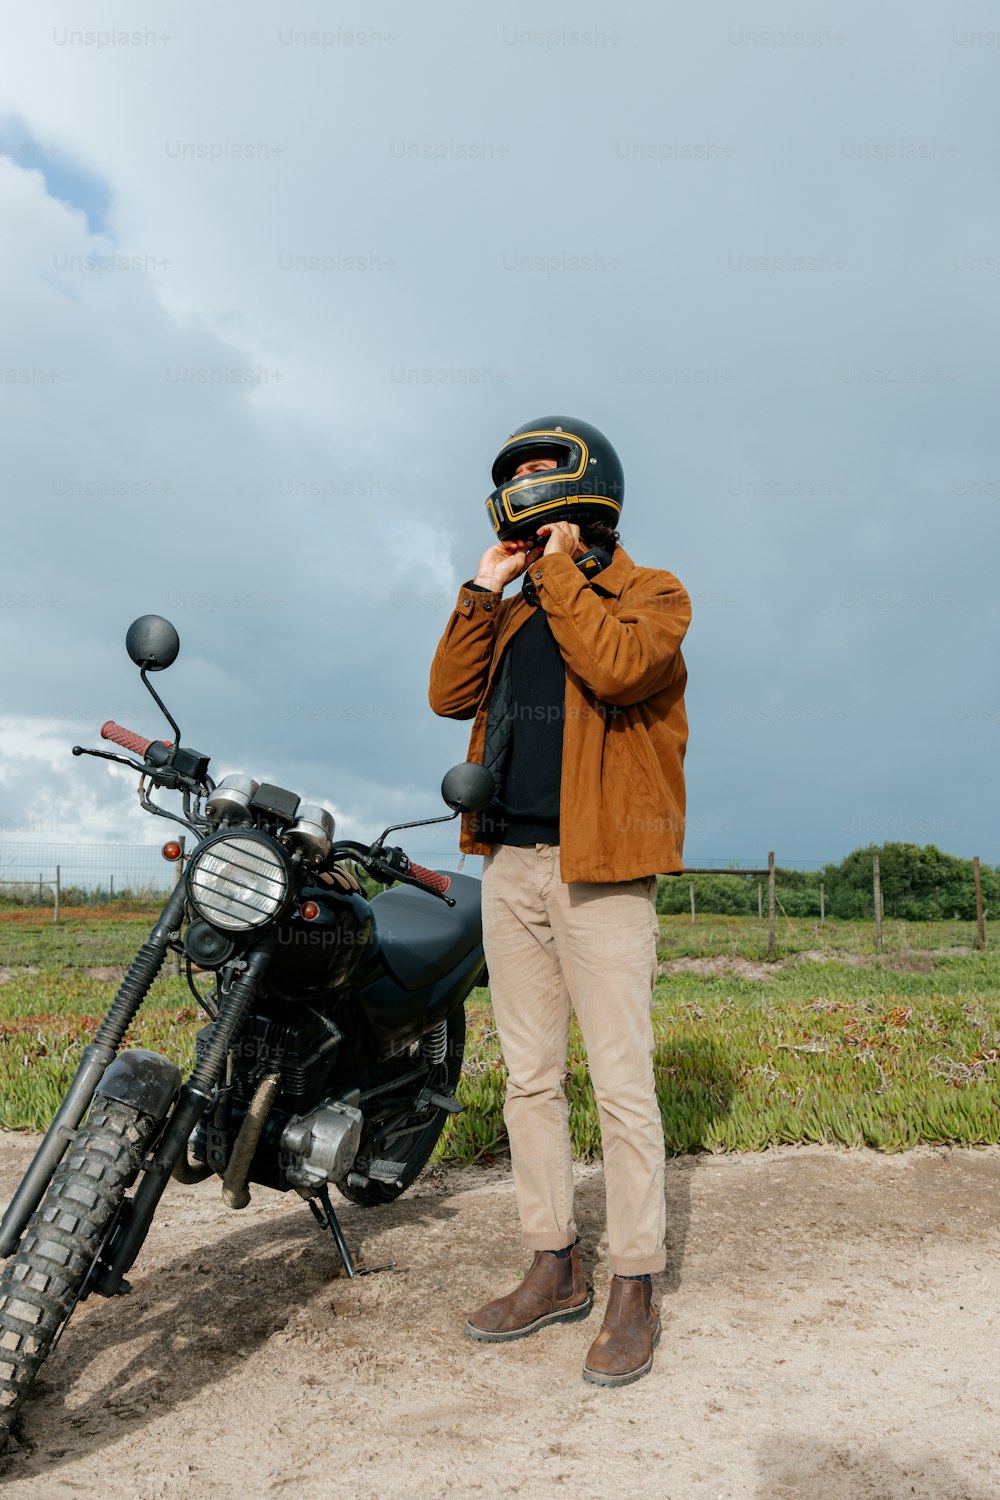 a man standing next to a motorcycle on a dirt road